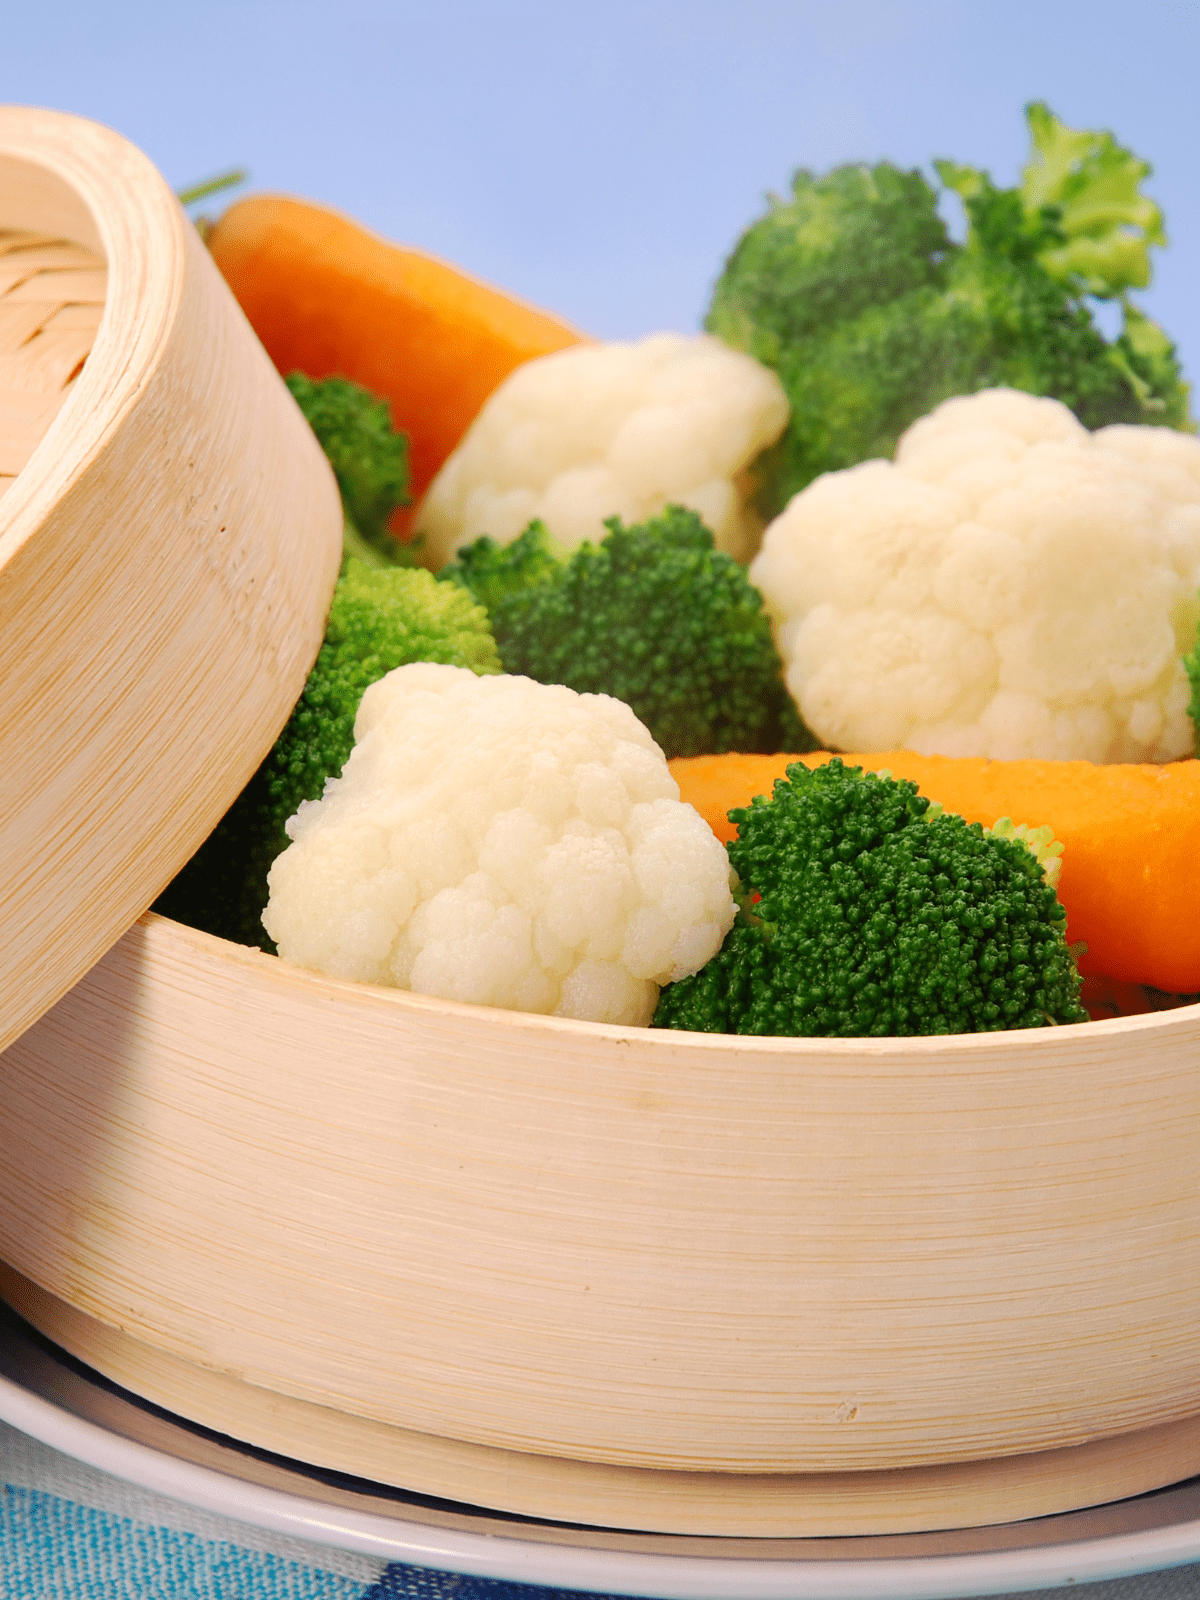 Steamed Frozen Vegetables Bamboo steamer with broccoli and carrots and cauliflower steaming.